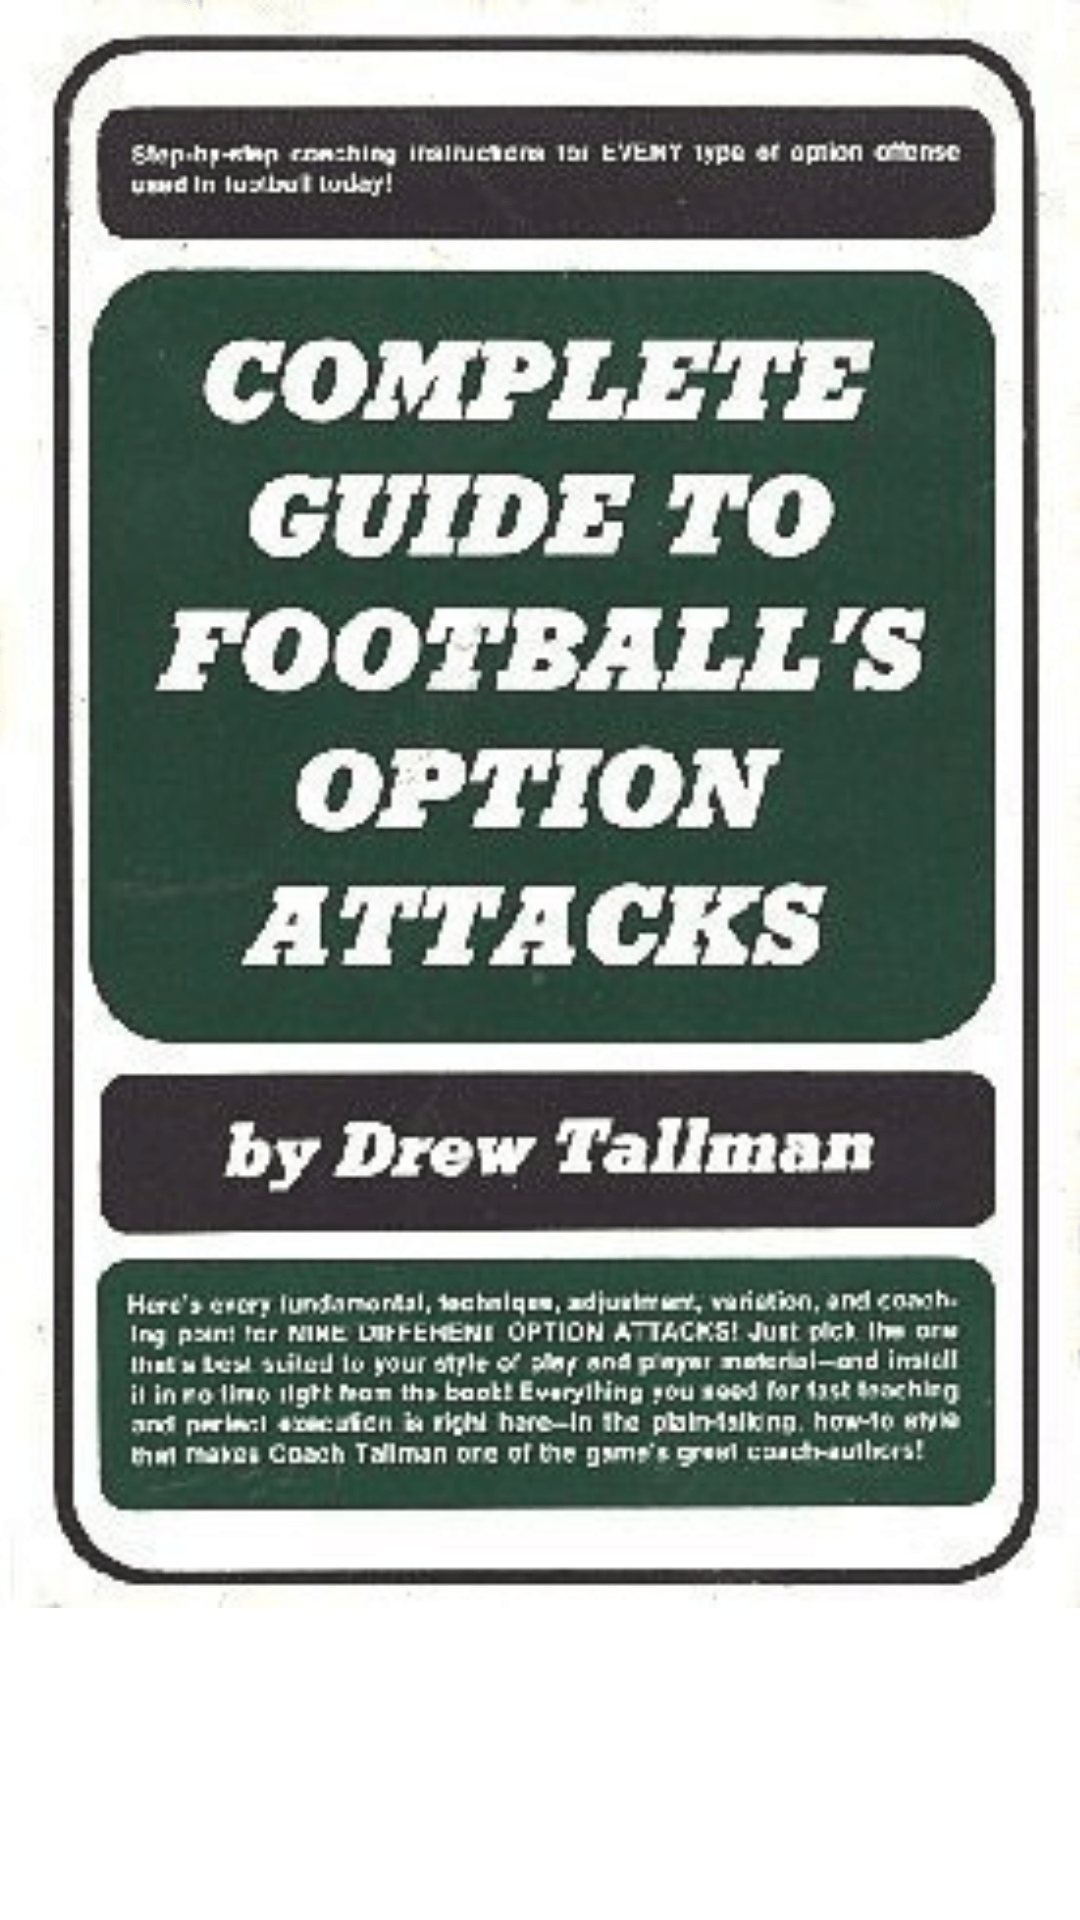 Complete Guide to Football's Option Attacks